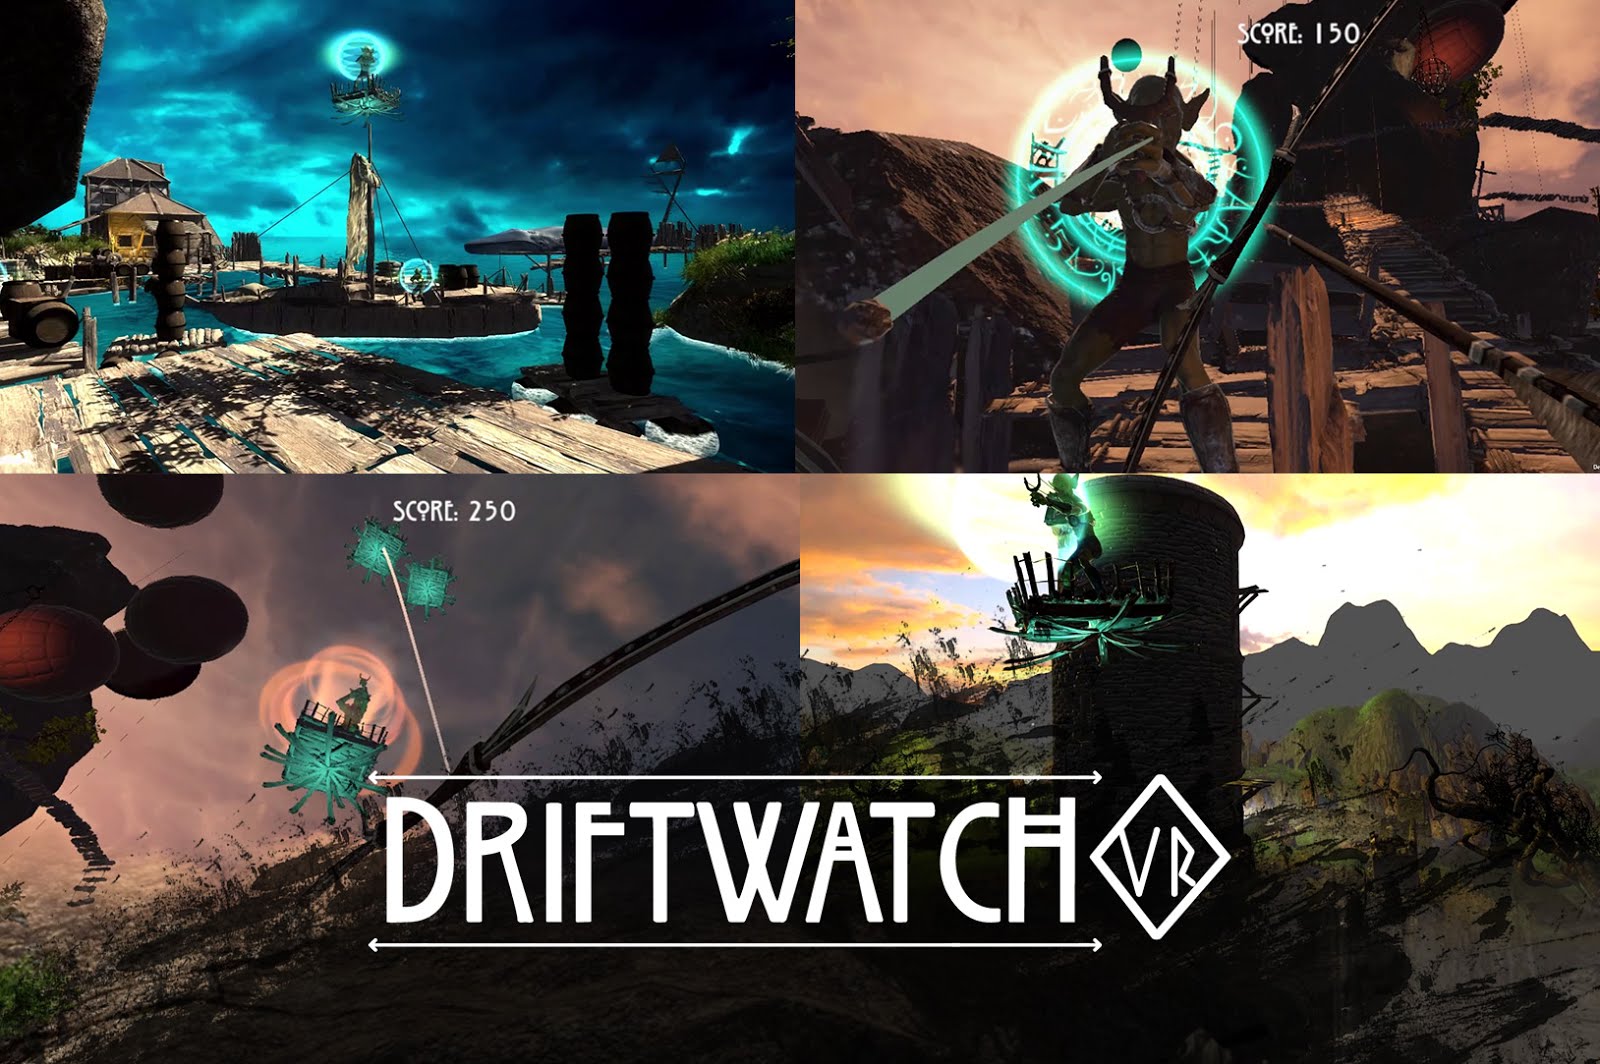 Driftwatch VR for Vive